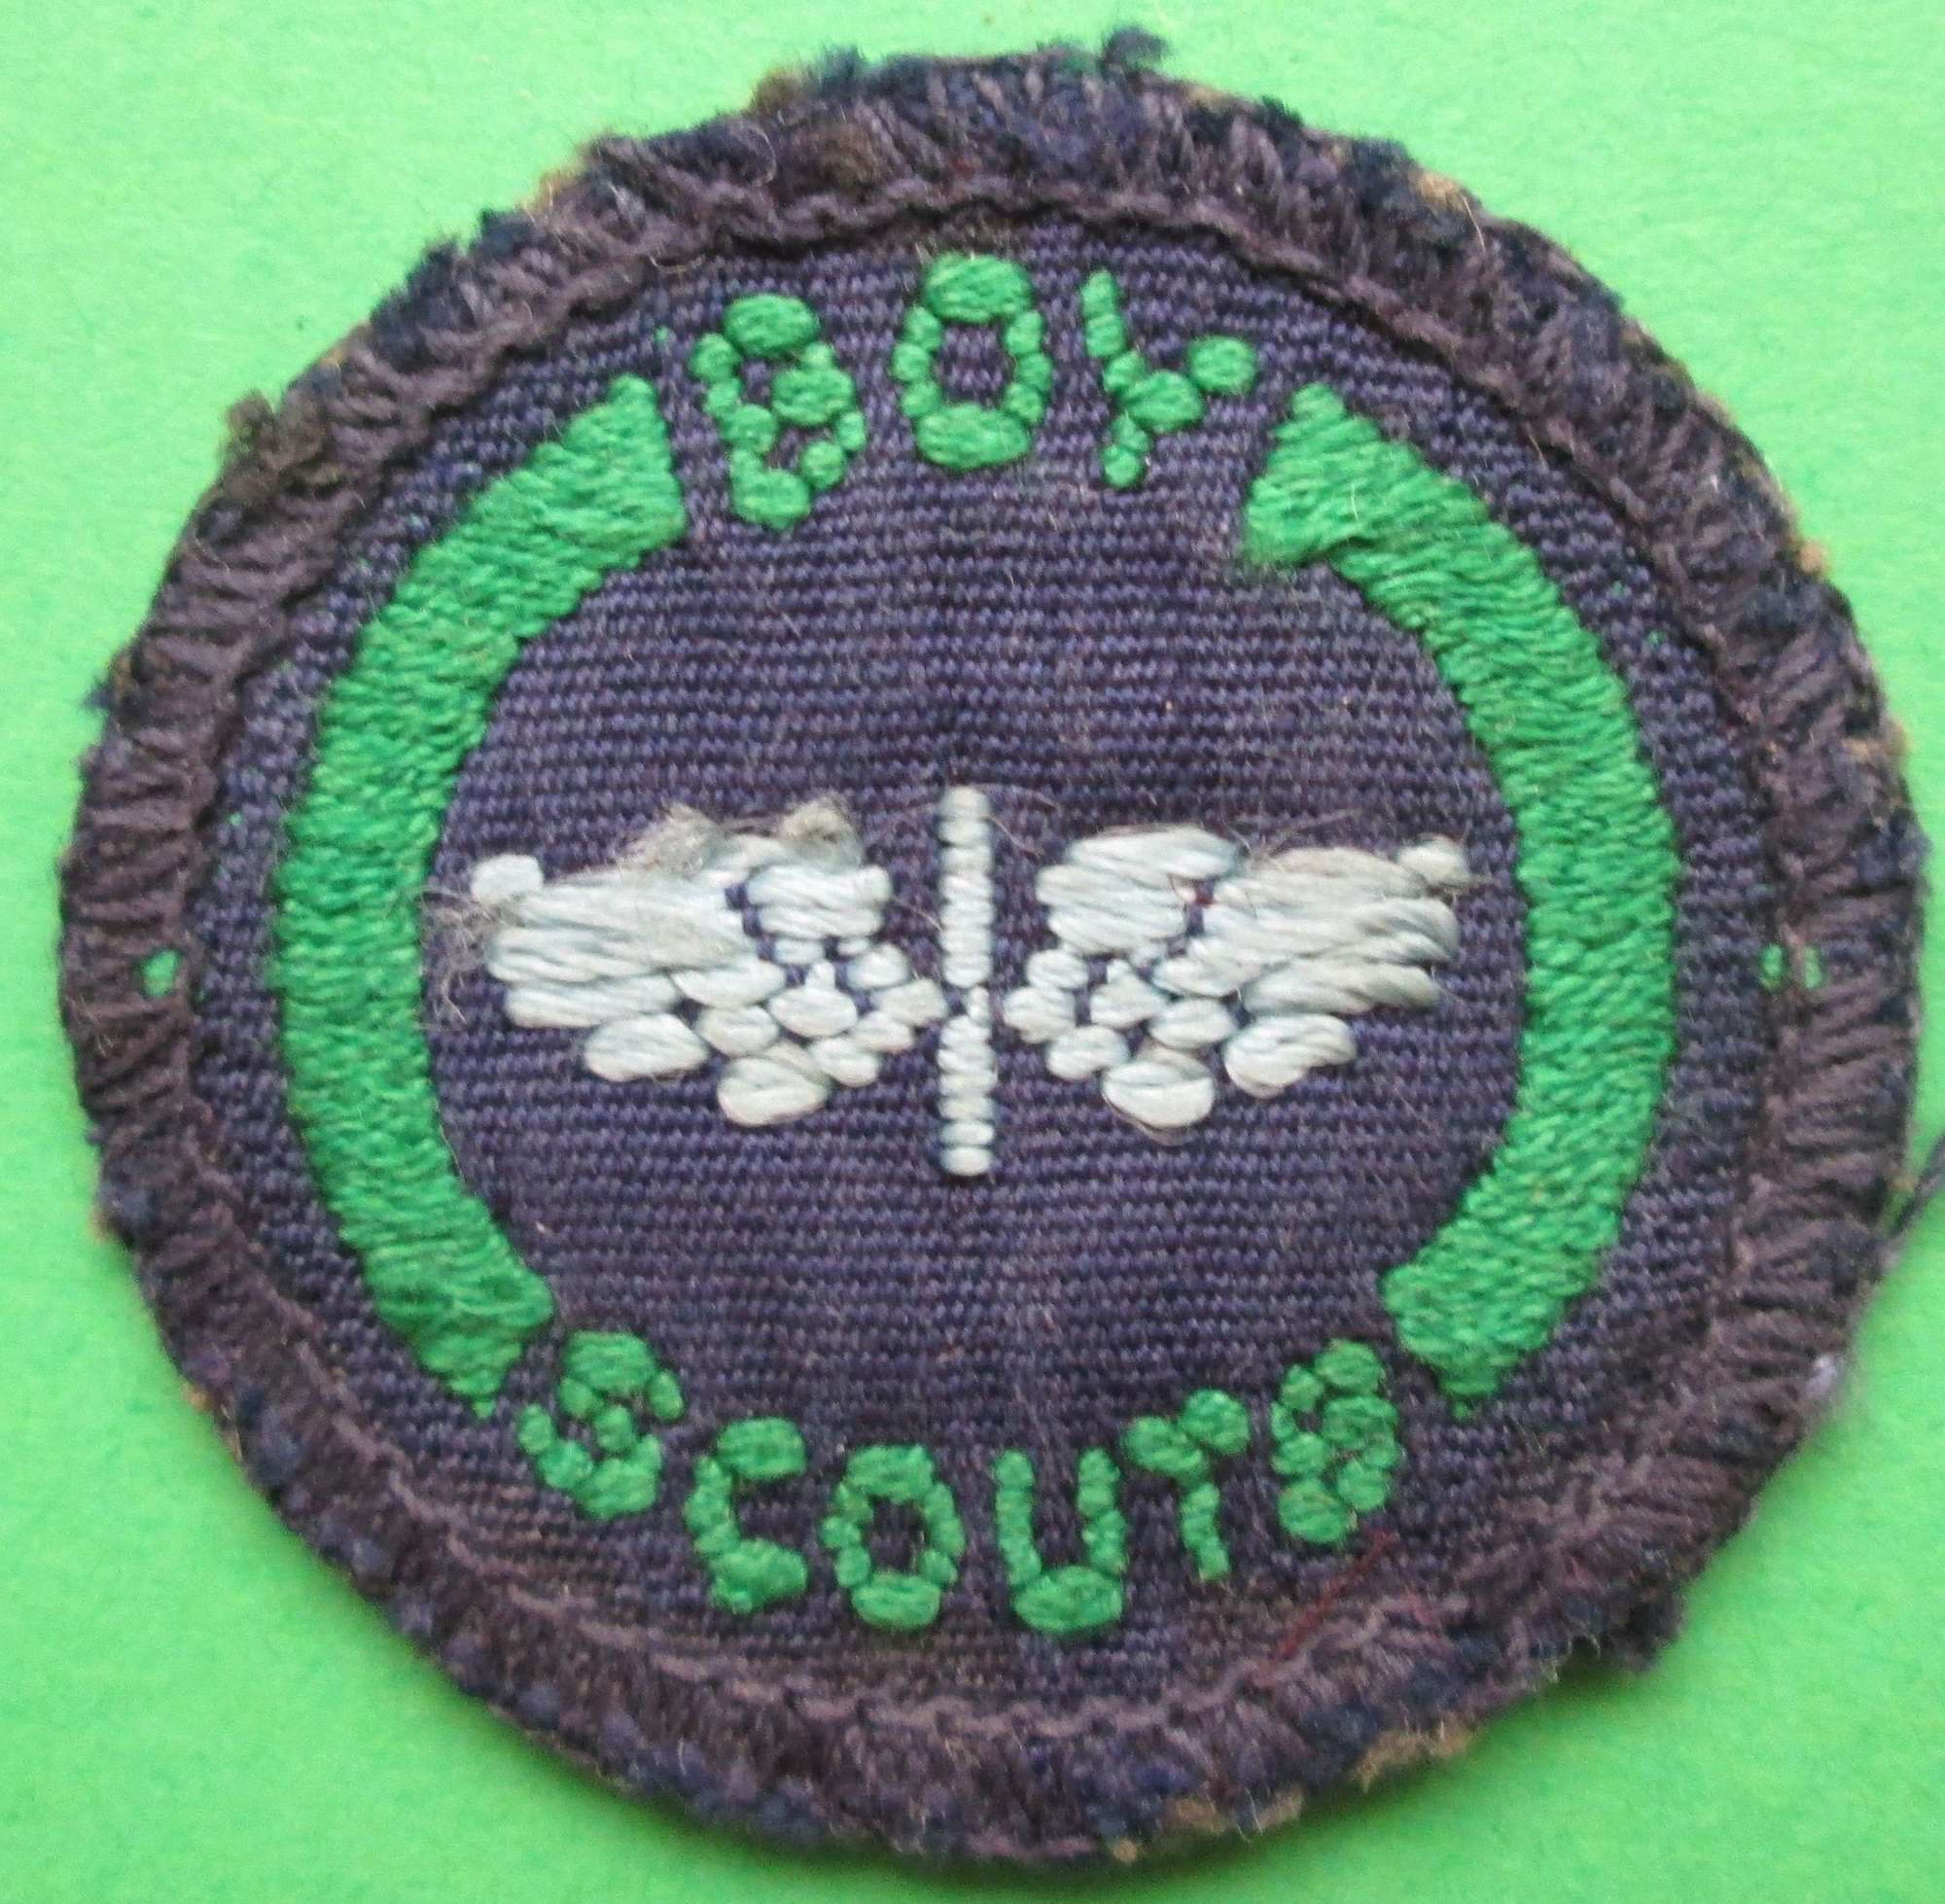 A GOOD USED BOY SCOUTS AIR APPRENTICE BADGE